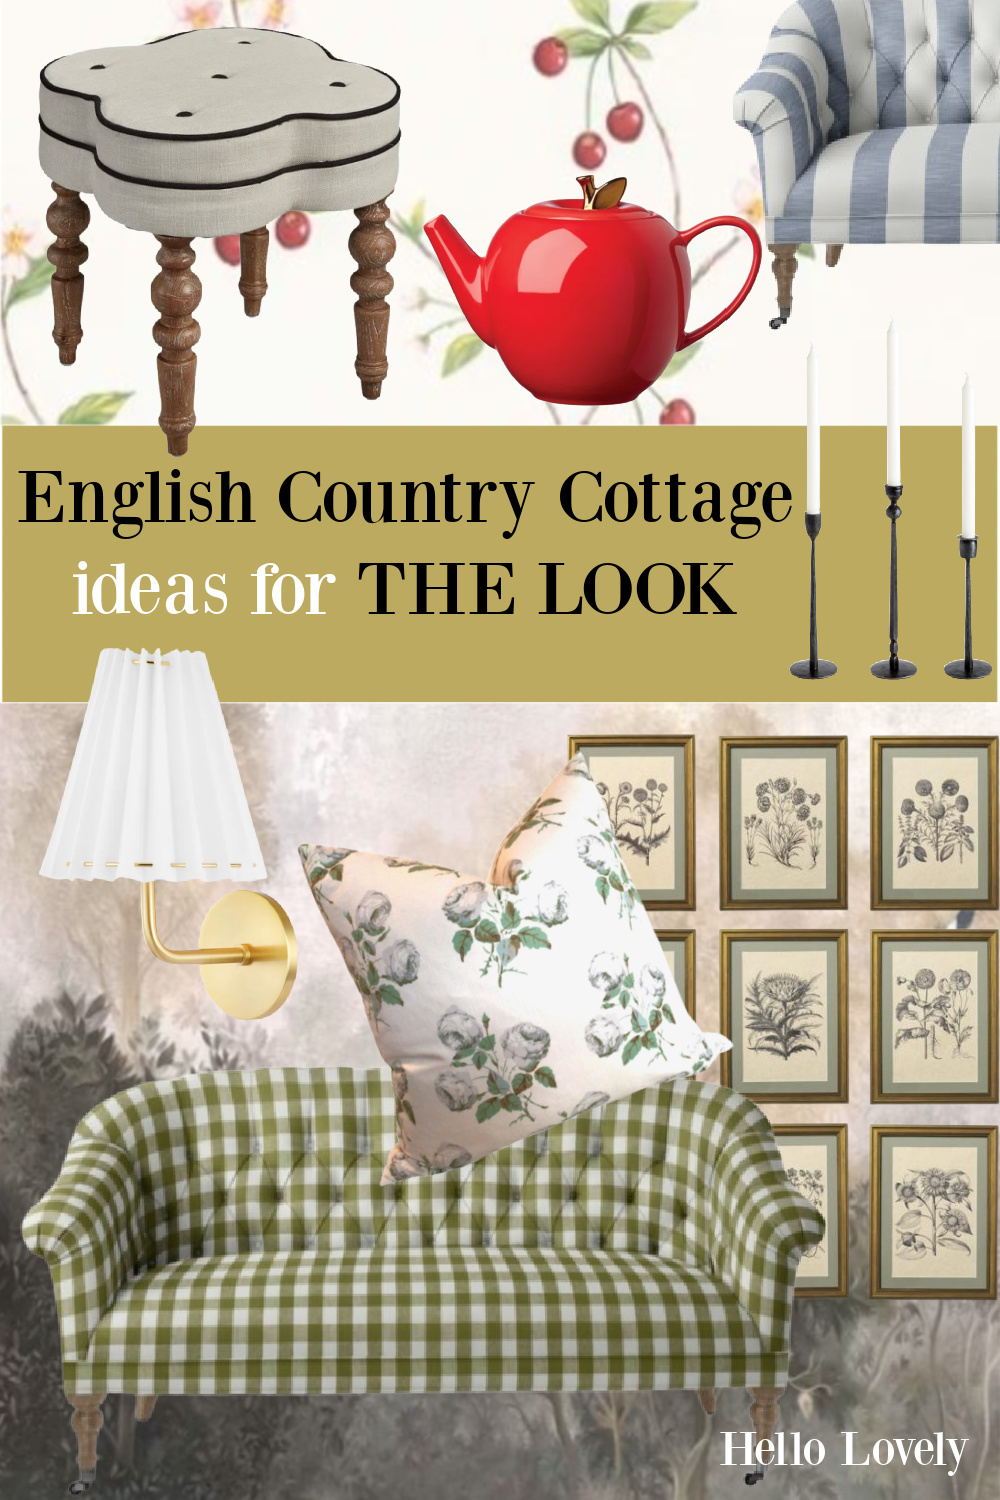 English country cottage ideas for the look on Hello Lovely Studio. #englishcountry #shopthelook